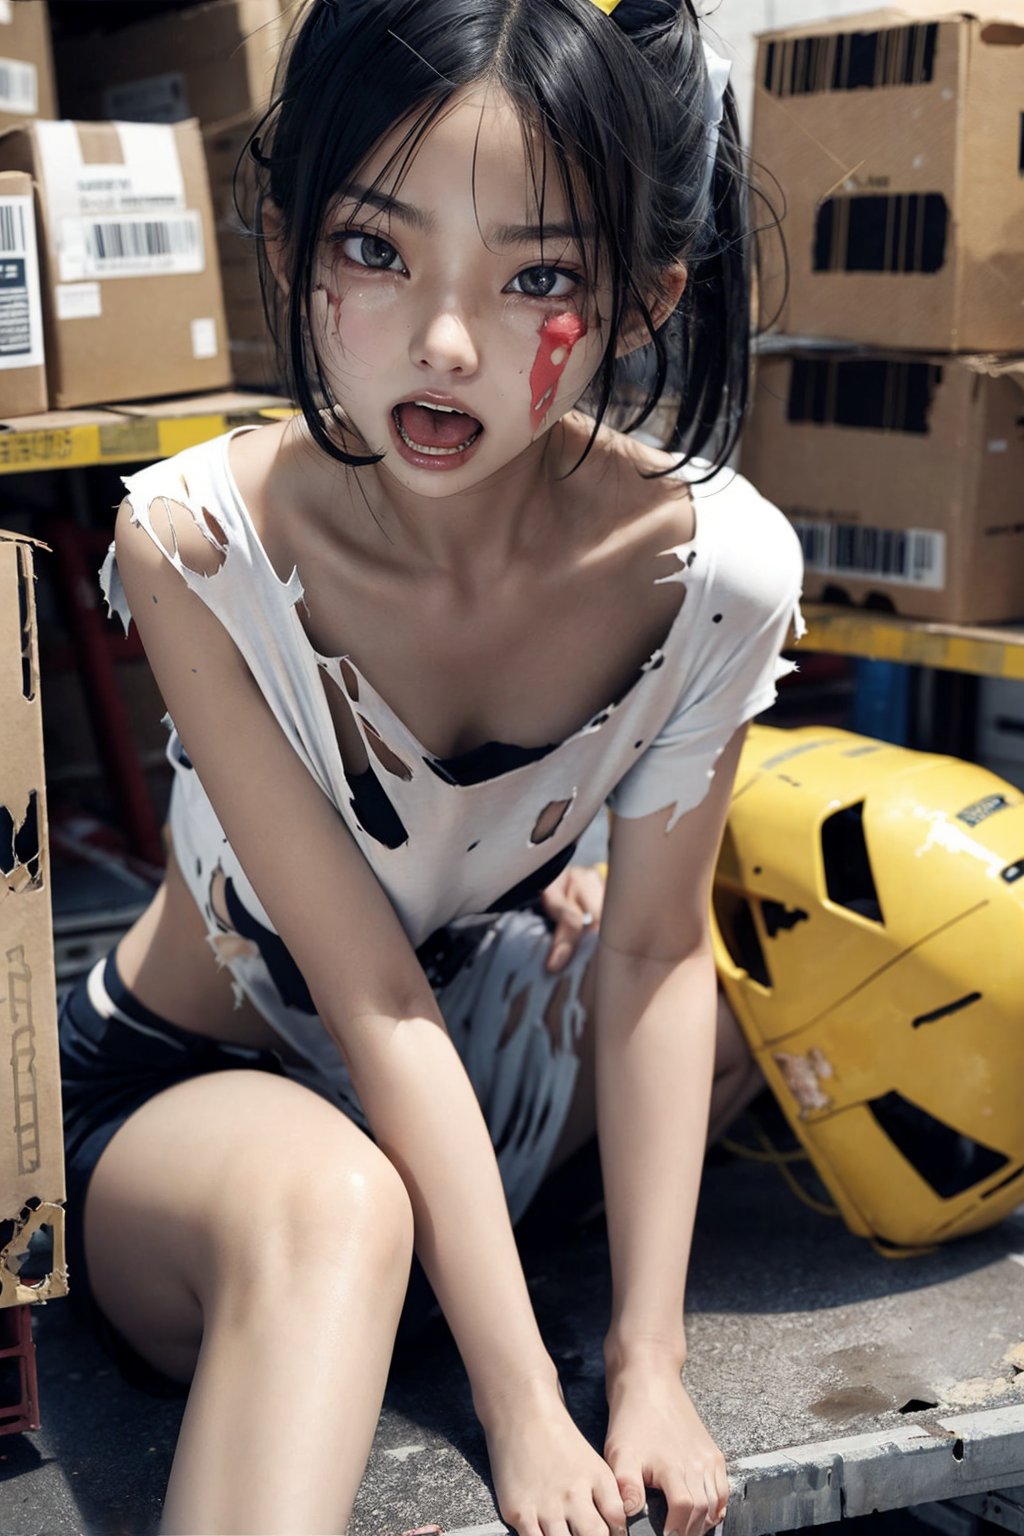 A very beautiful Korean girl, 18 years old, wearing torn and torn clothes, sweating, disheveled, slightly messy hair, frowning, open mouth, scared expression, sitting in a warehouse,tear clothes